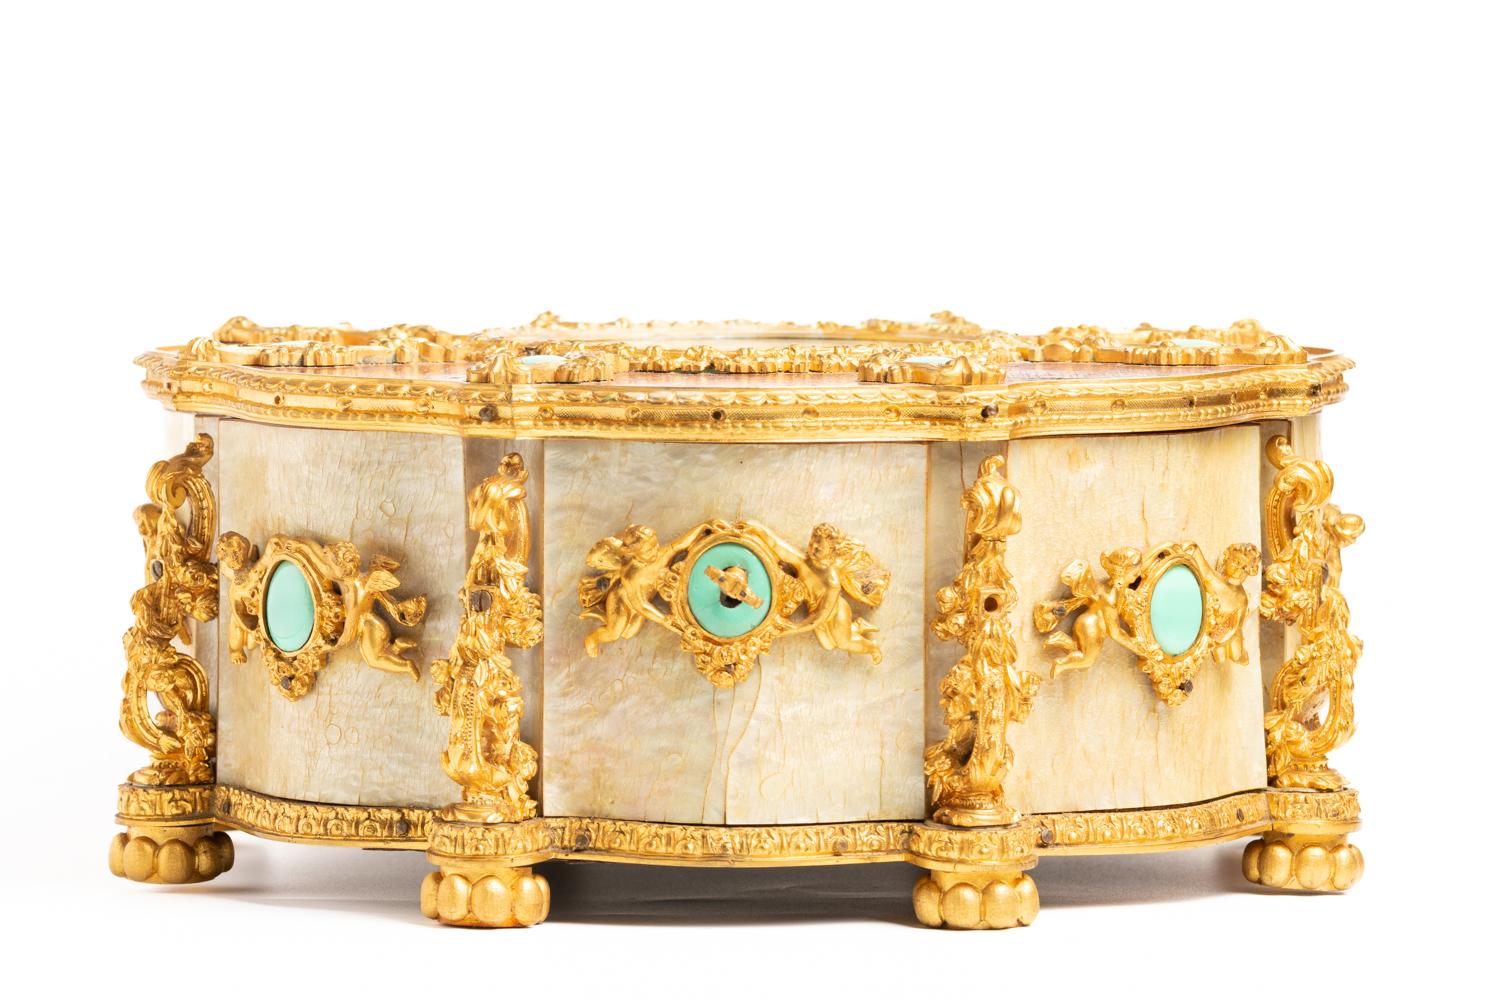 This fine and exceptional 19th-century French chocolate kingwood and the ormolu casket/jewellery box by Maison Boissier. The story of Maison Boissier begins in 1827, when Béllissaire Boissier, the founder and chocolatier set up his first stall on